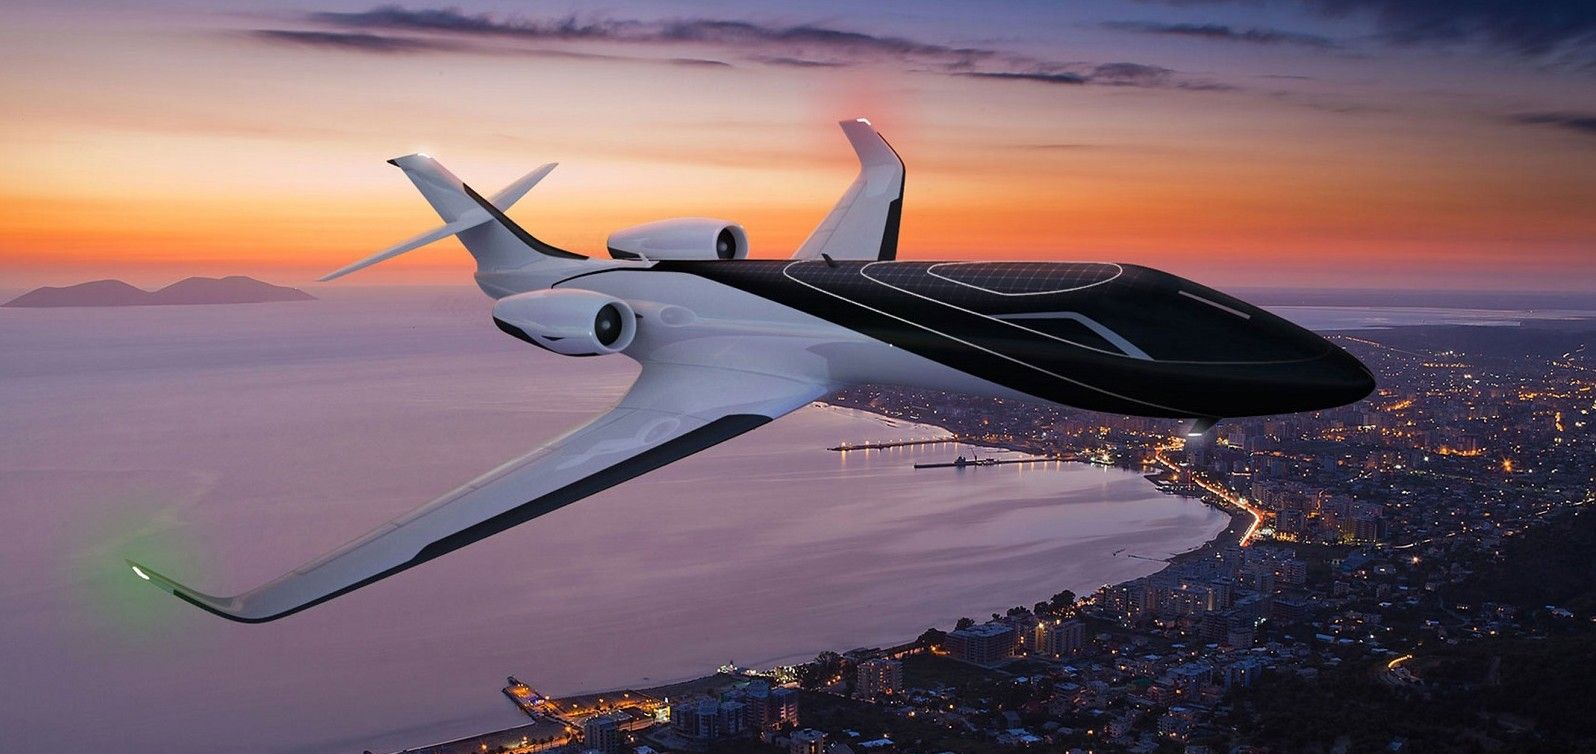 10 Most Luxurious Private Jets In The World | TheRichest